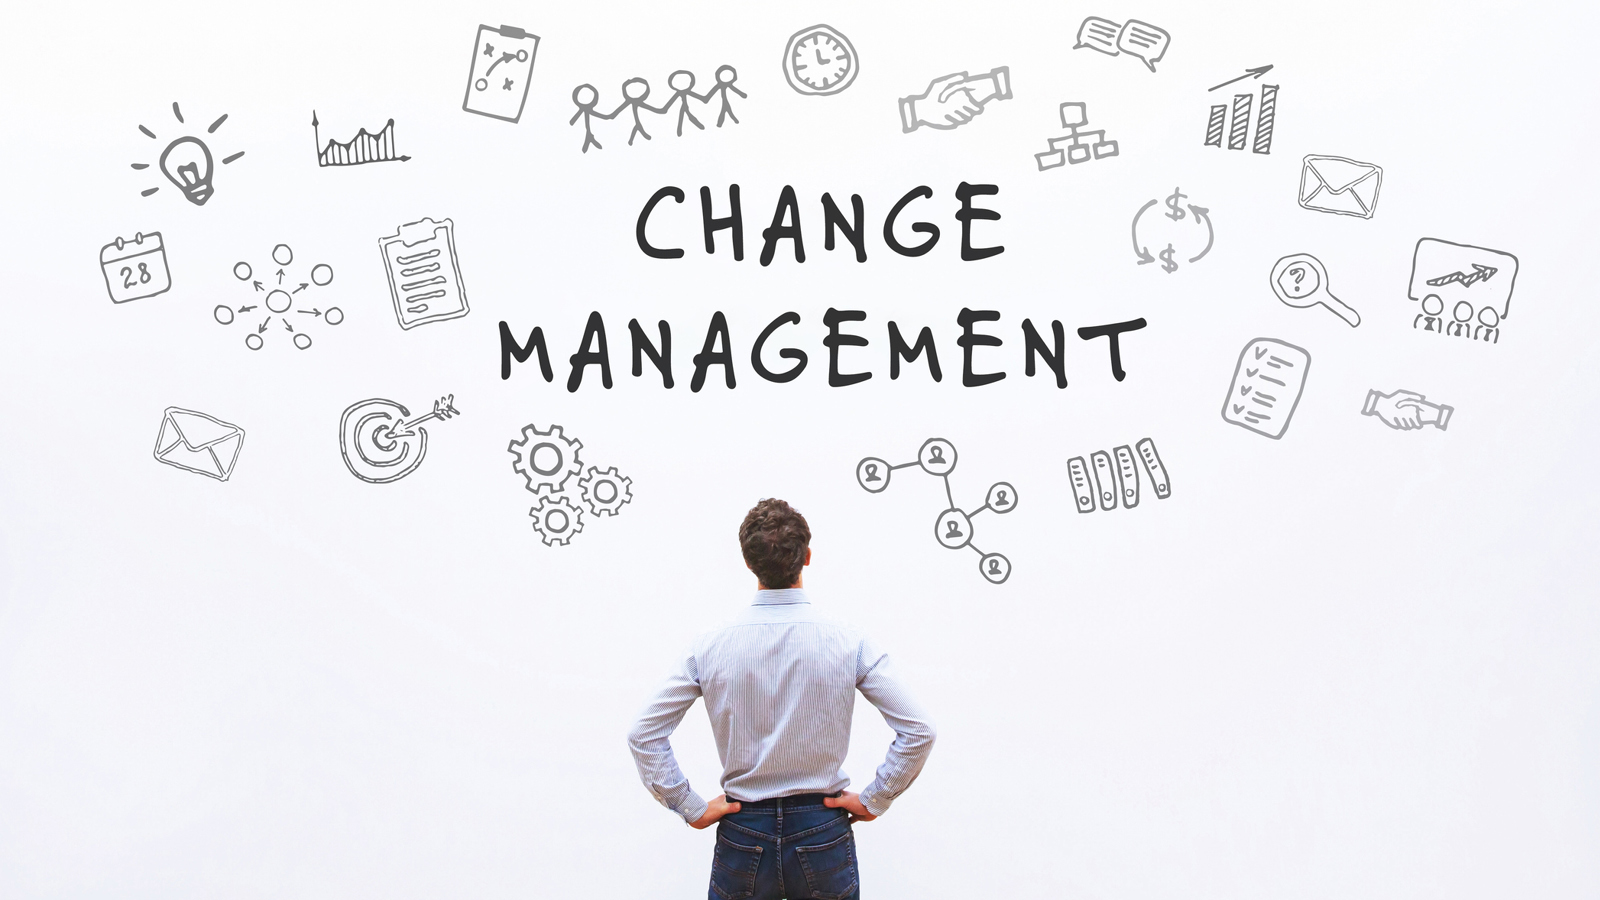 A man looks at a change management board